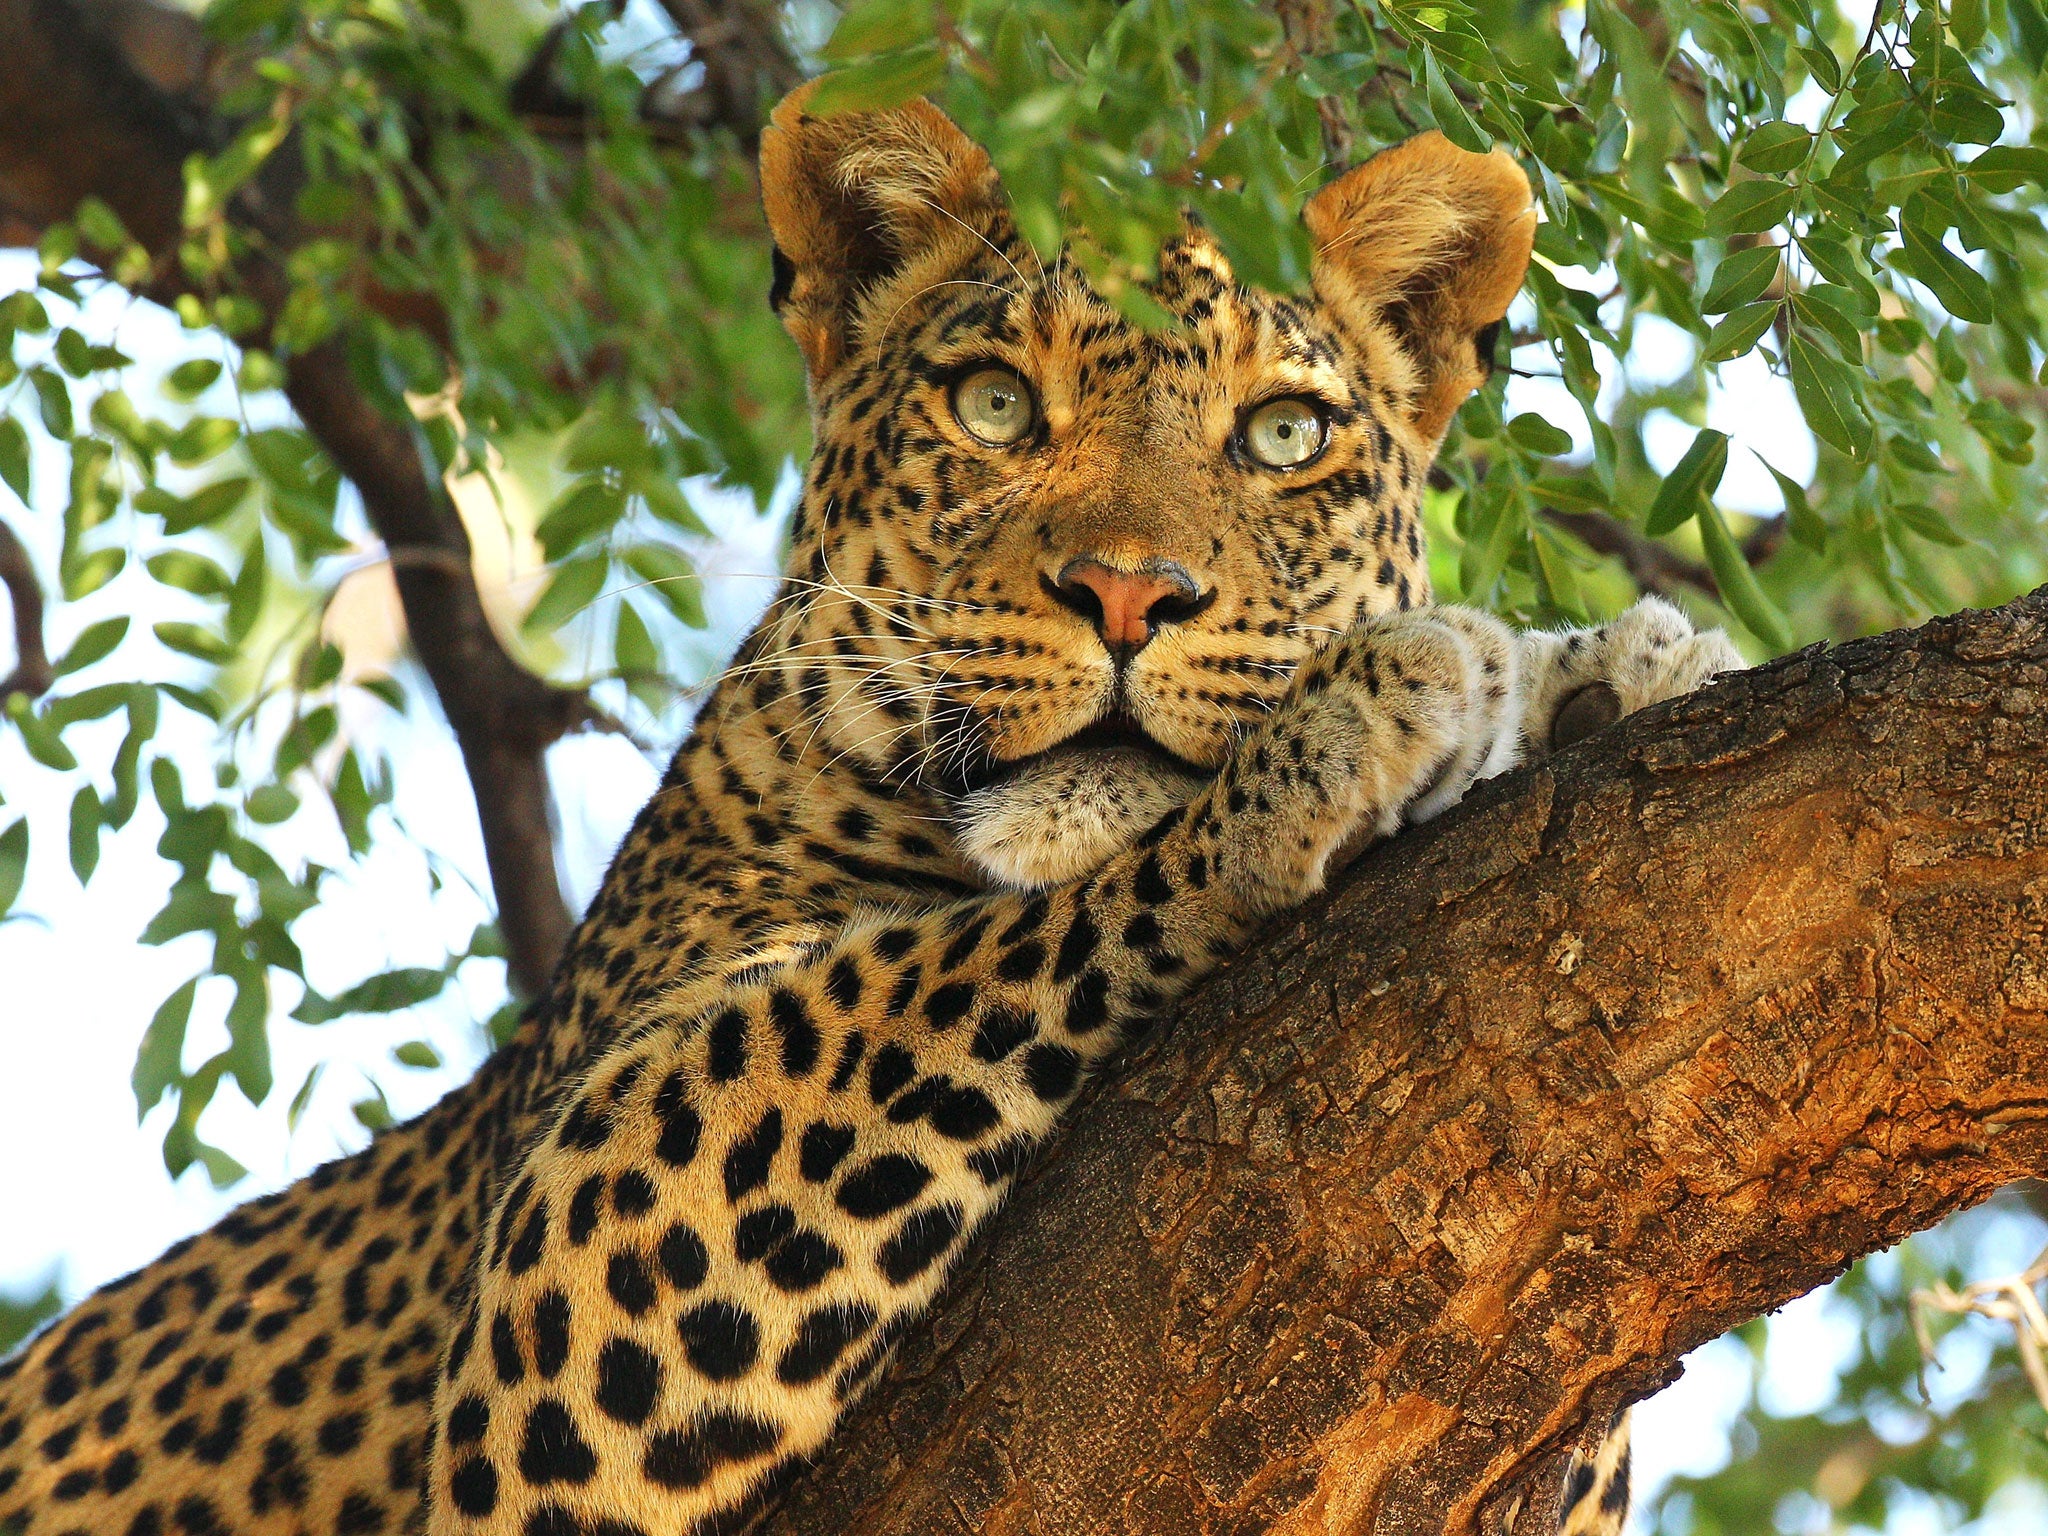 On the spot: Safari visitors feel cheated if they don’t see a leopard, one of the Big Five, on an African safari